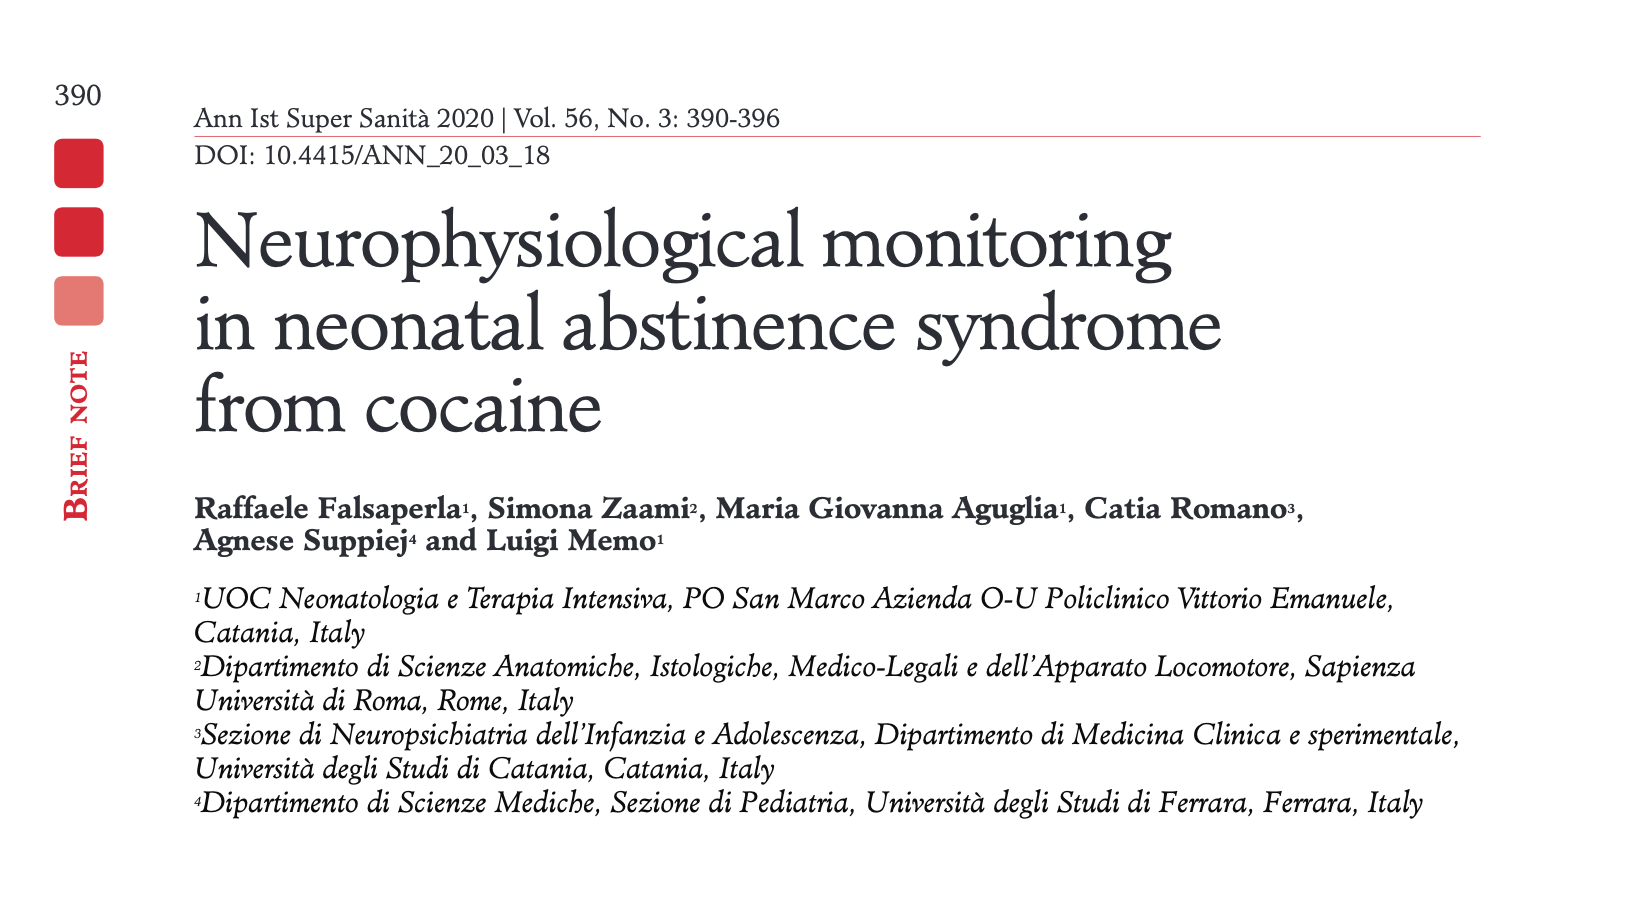 Al momento stai visualizzando Neurophysiological monitoring in neonatal abstinence syndrome from cocaine